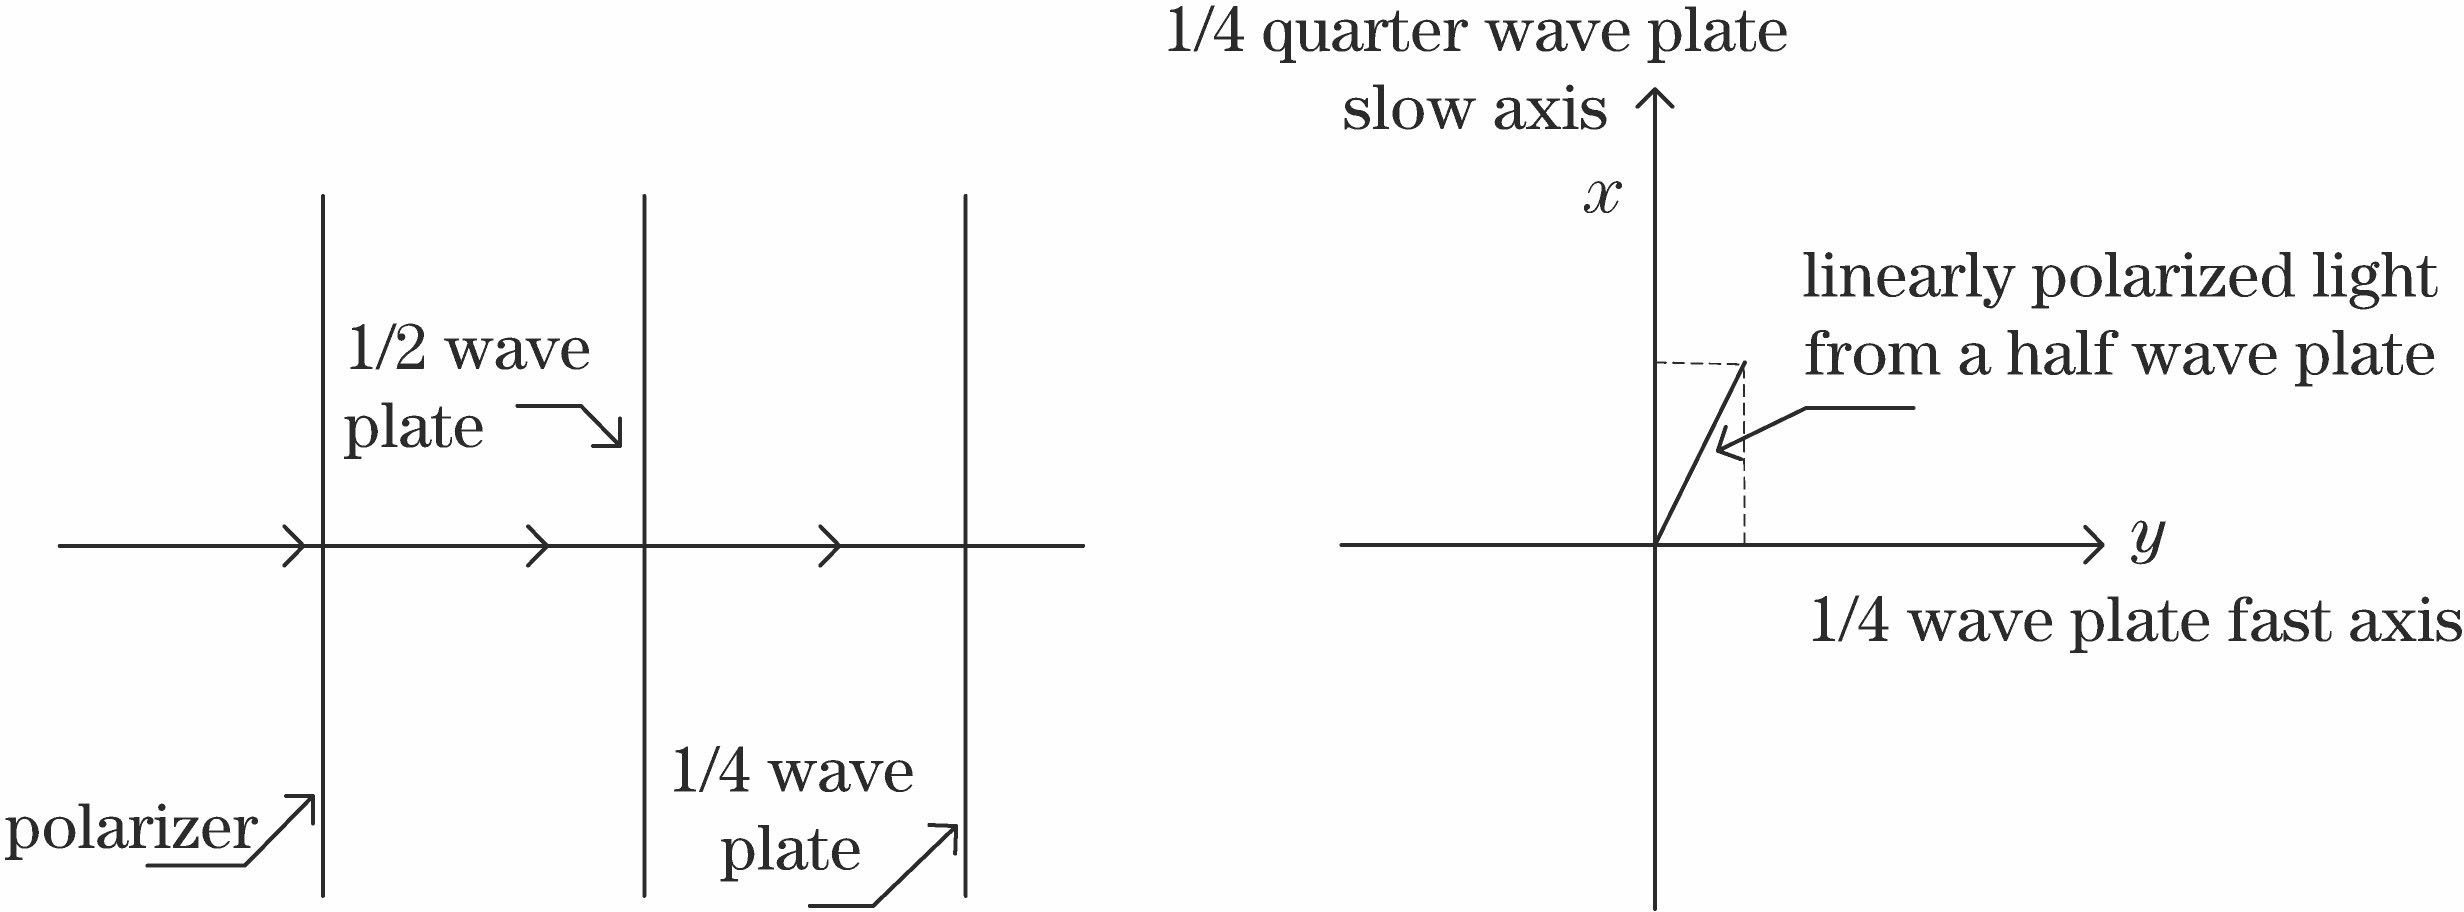 Linearly polarized light becomes elliptically polarized light after passing through 1/4 wave plate